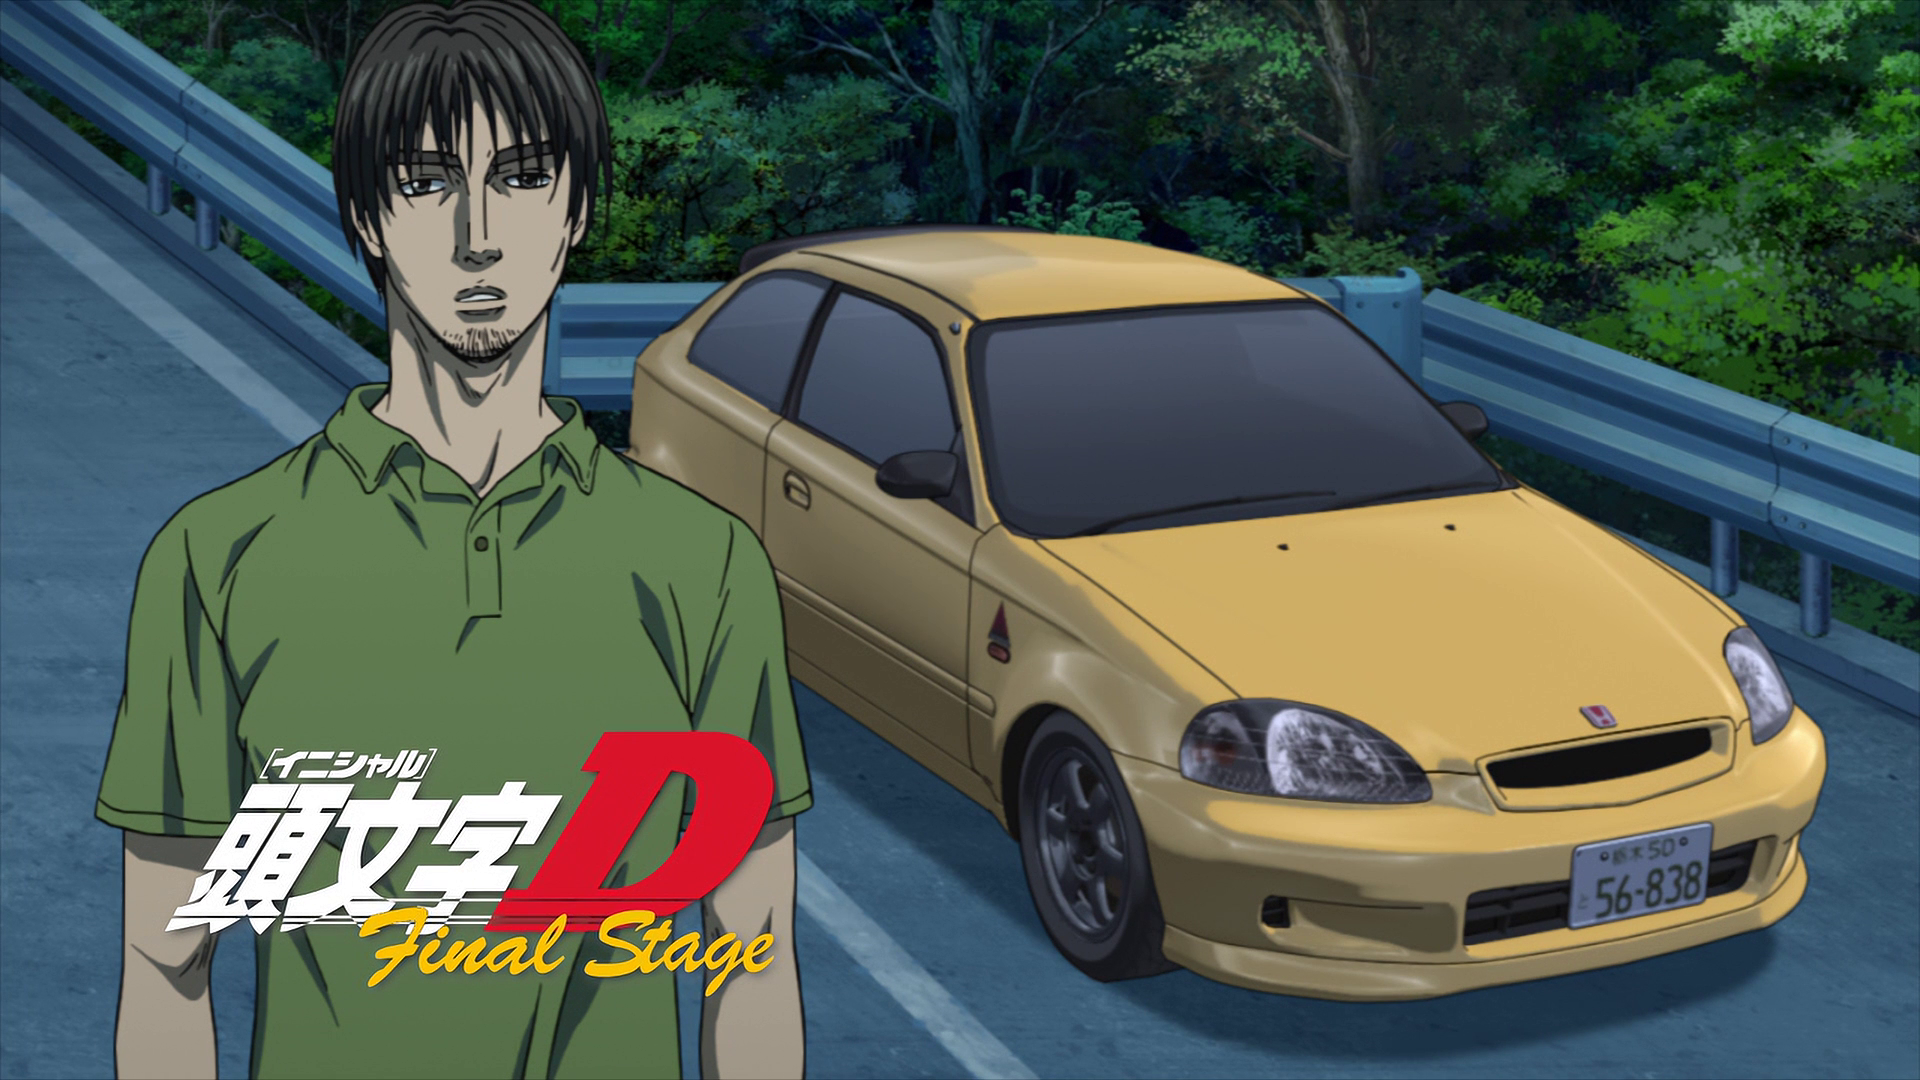 Initial D Final Stage 